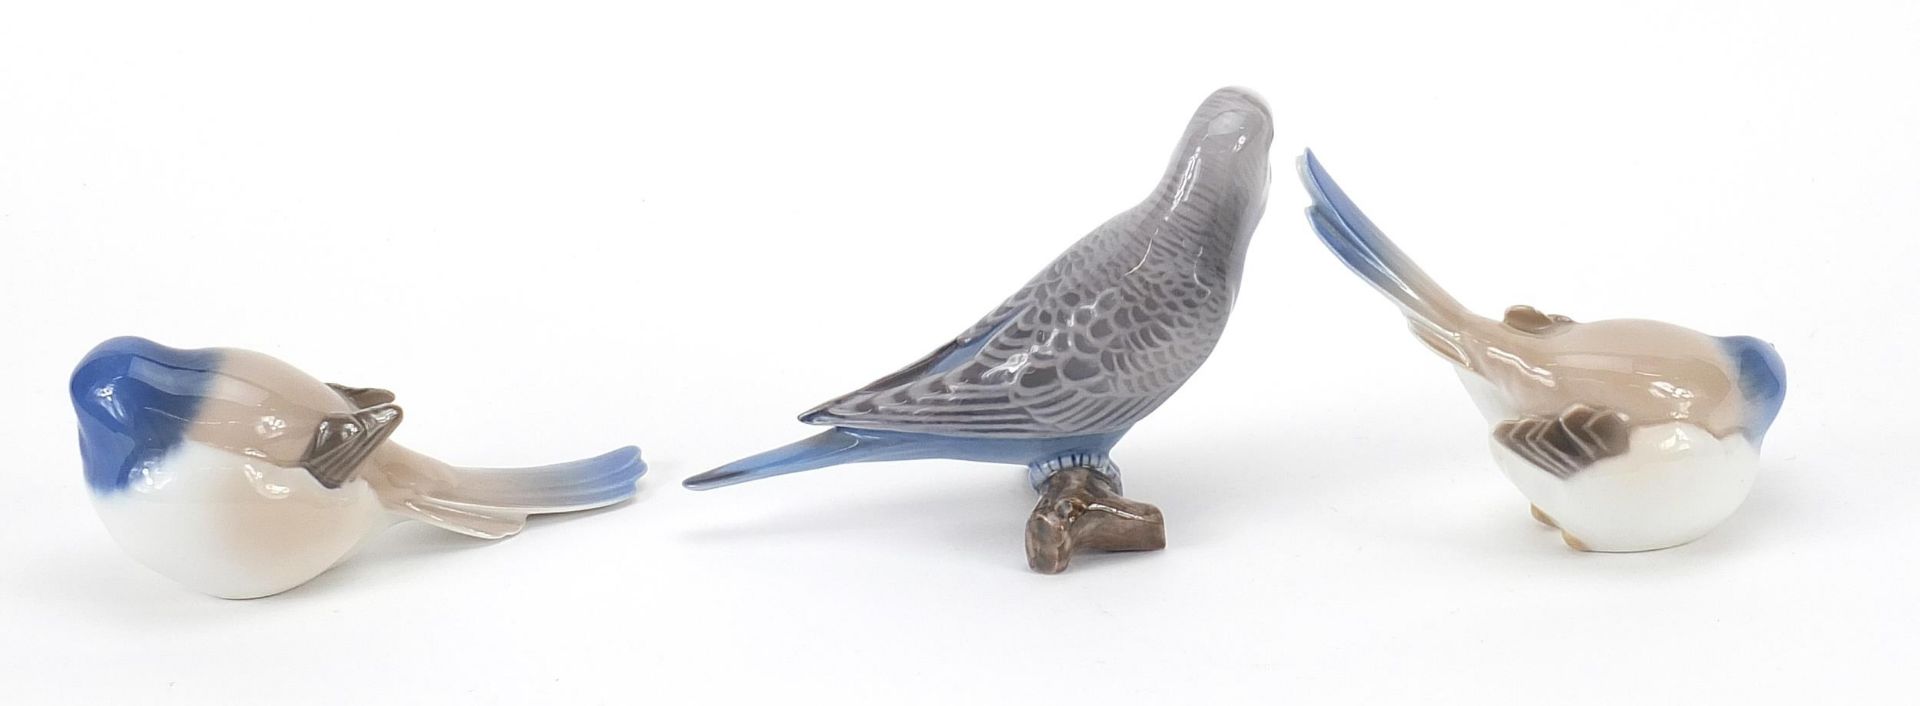 Bing & Grundell, three Danish porcelain birds including a budgie, the largest 14cm in length The - Image 2 of 3